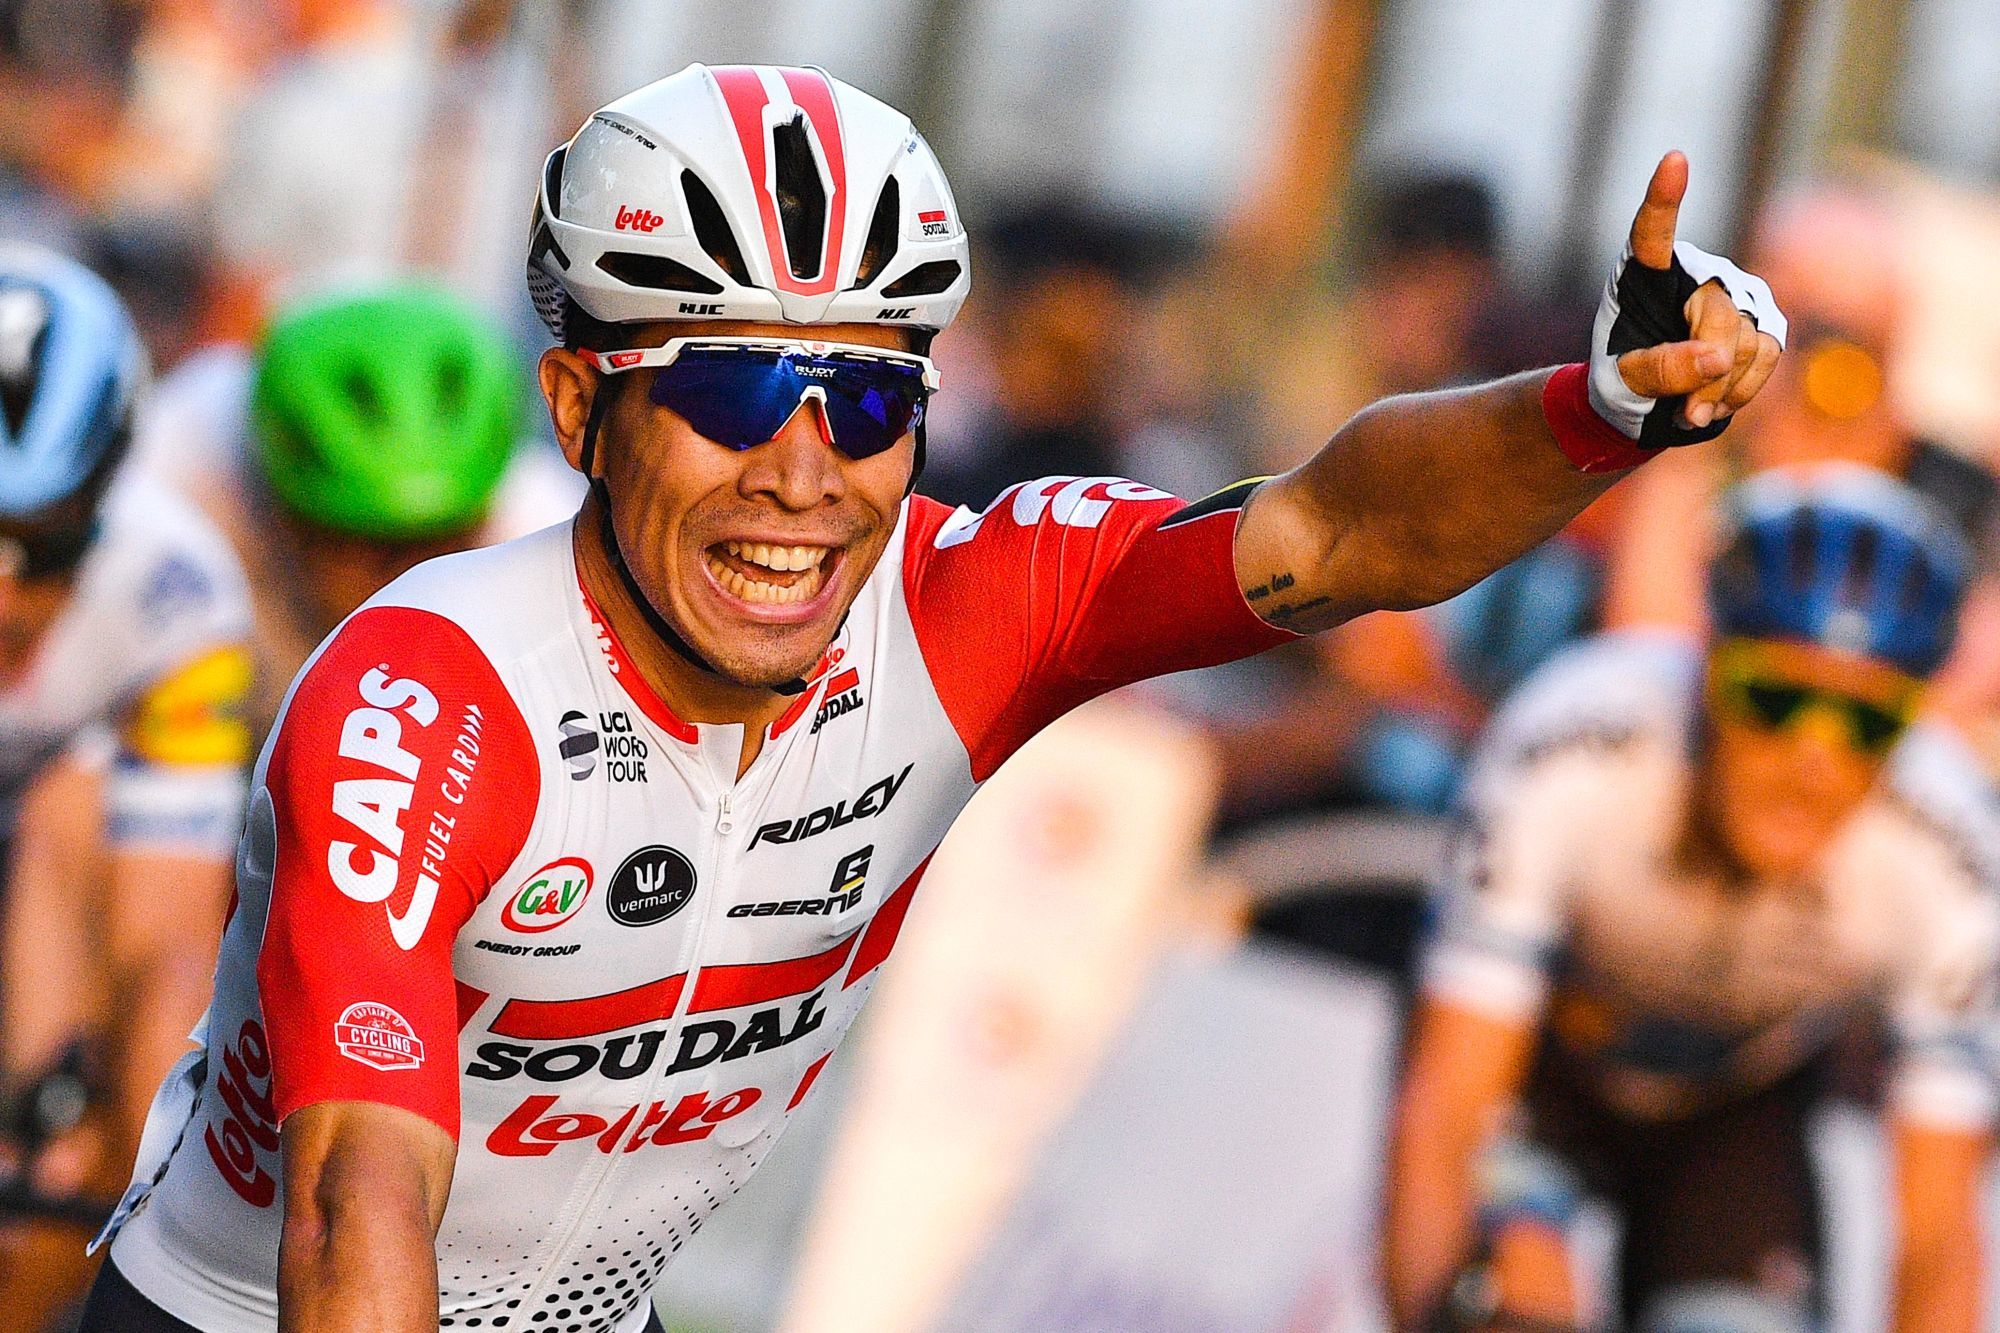 Australian Caleb Ewan of Lotto Soudal celebrates as he crosses the finish line to win the final stage of the 106th edition of the Tour de France cycling race, from Rambouillet to Paris Champs-Elysees (128km), France, Sunday 28 July 2019. This year's Tour de France starts in Brussels and takes place from July 6th to July 28th. Photo : Belga / Icon Sport